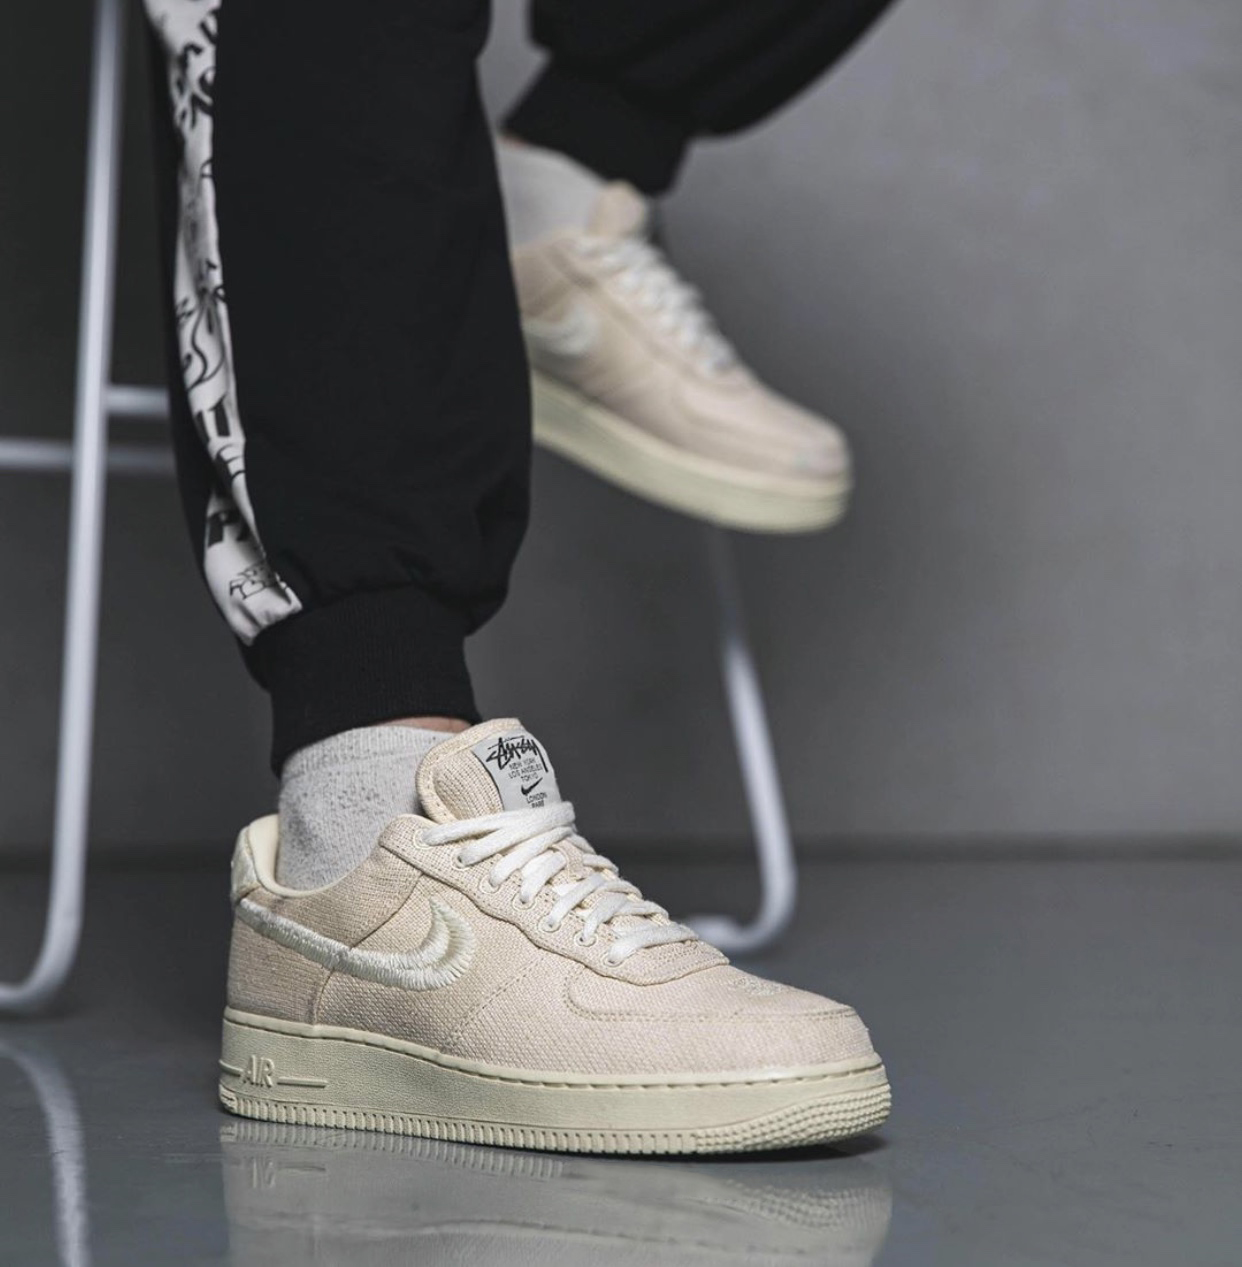 Stussy Nike Air Force 1 Fossil Stone CZ9084-200 Release Date On-Feet